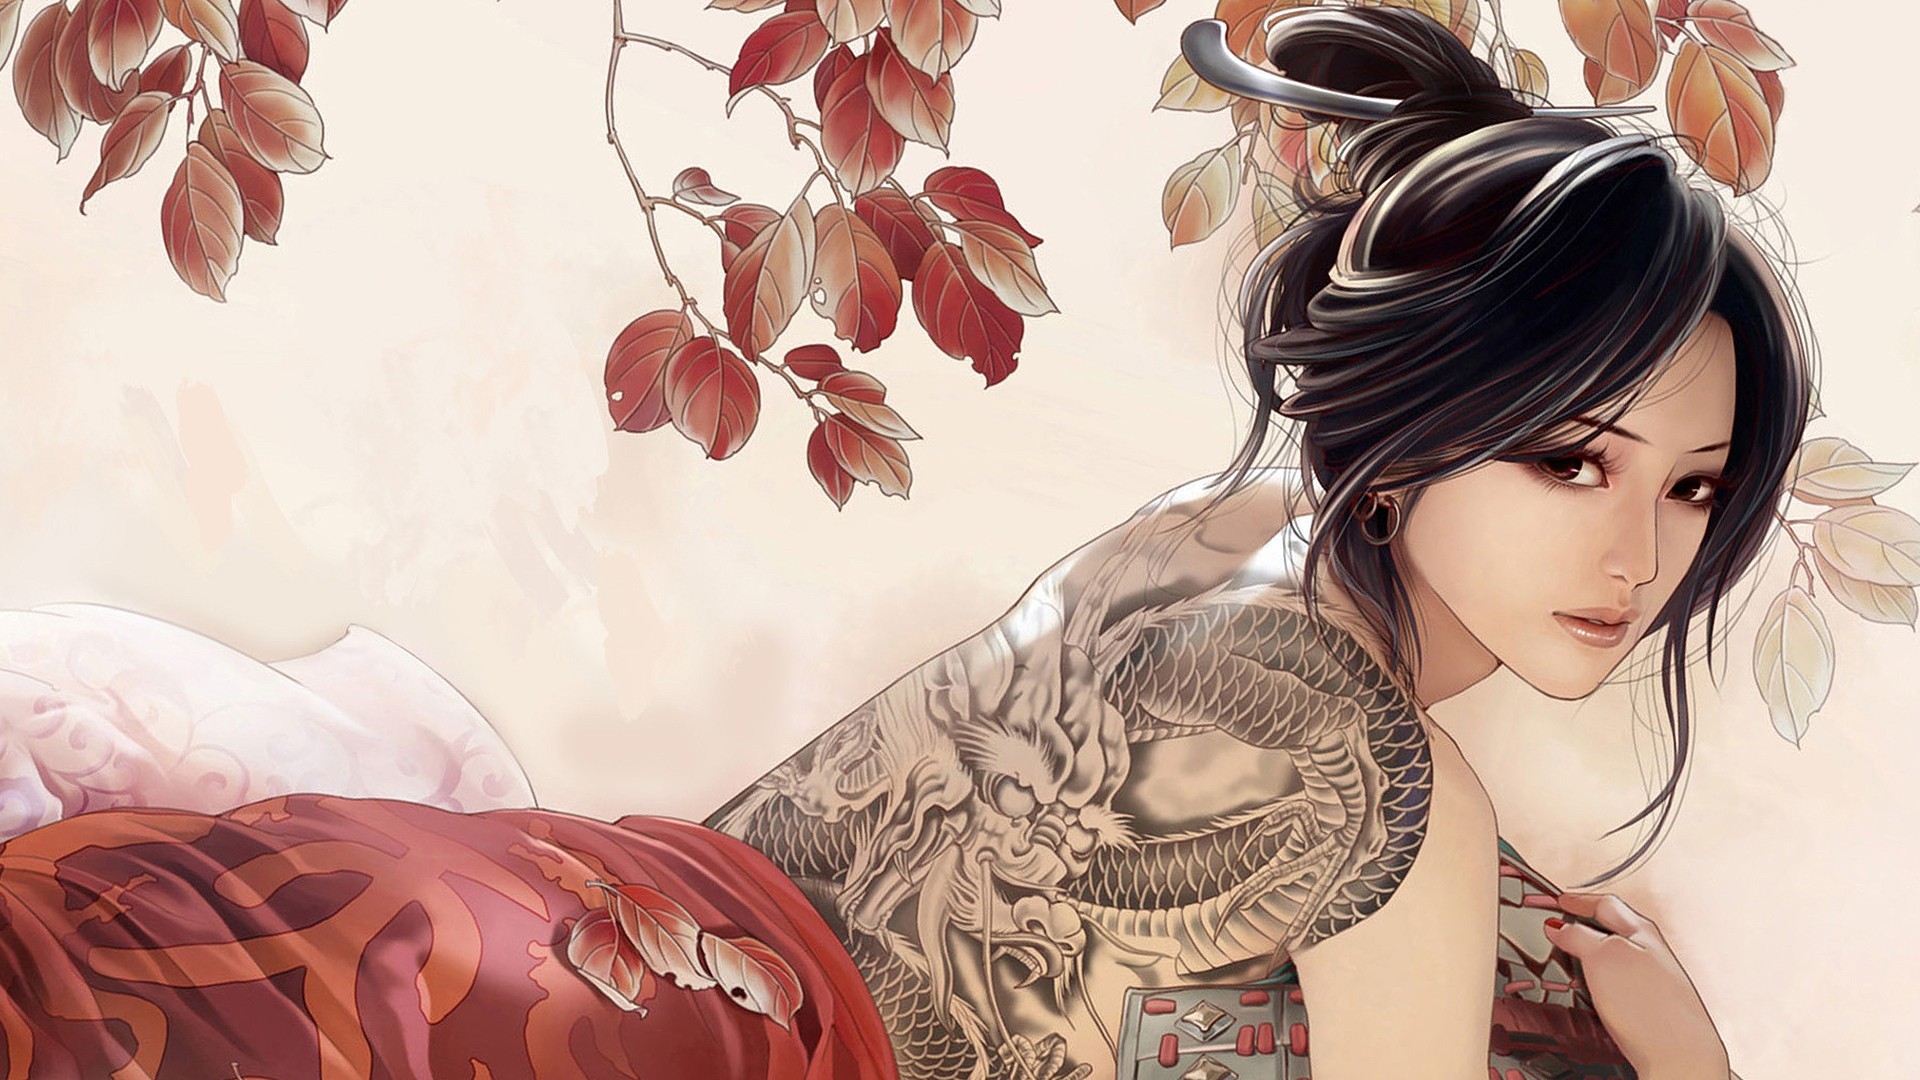 Anime 1920x1080 Asian drawing women inked girls simple background black hair looking at viewer fantasy art fantasy girl leaves twigs